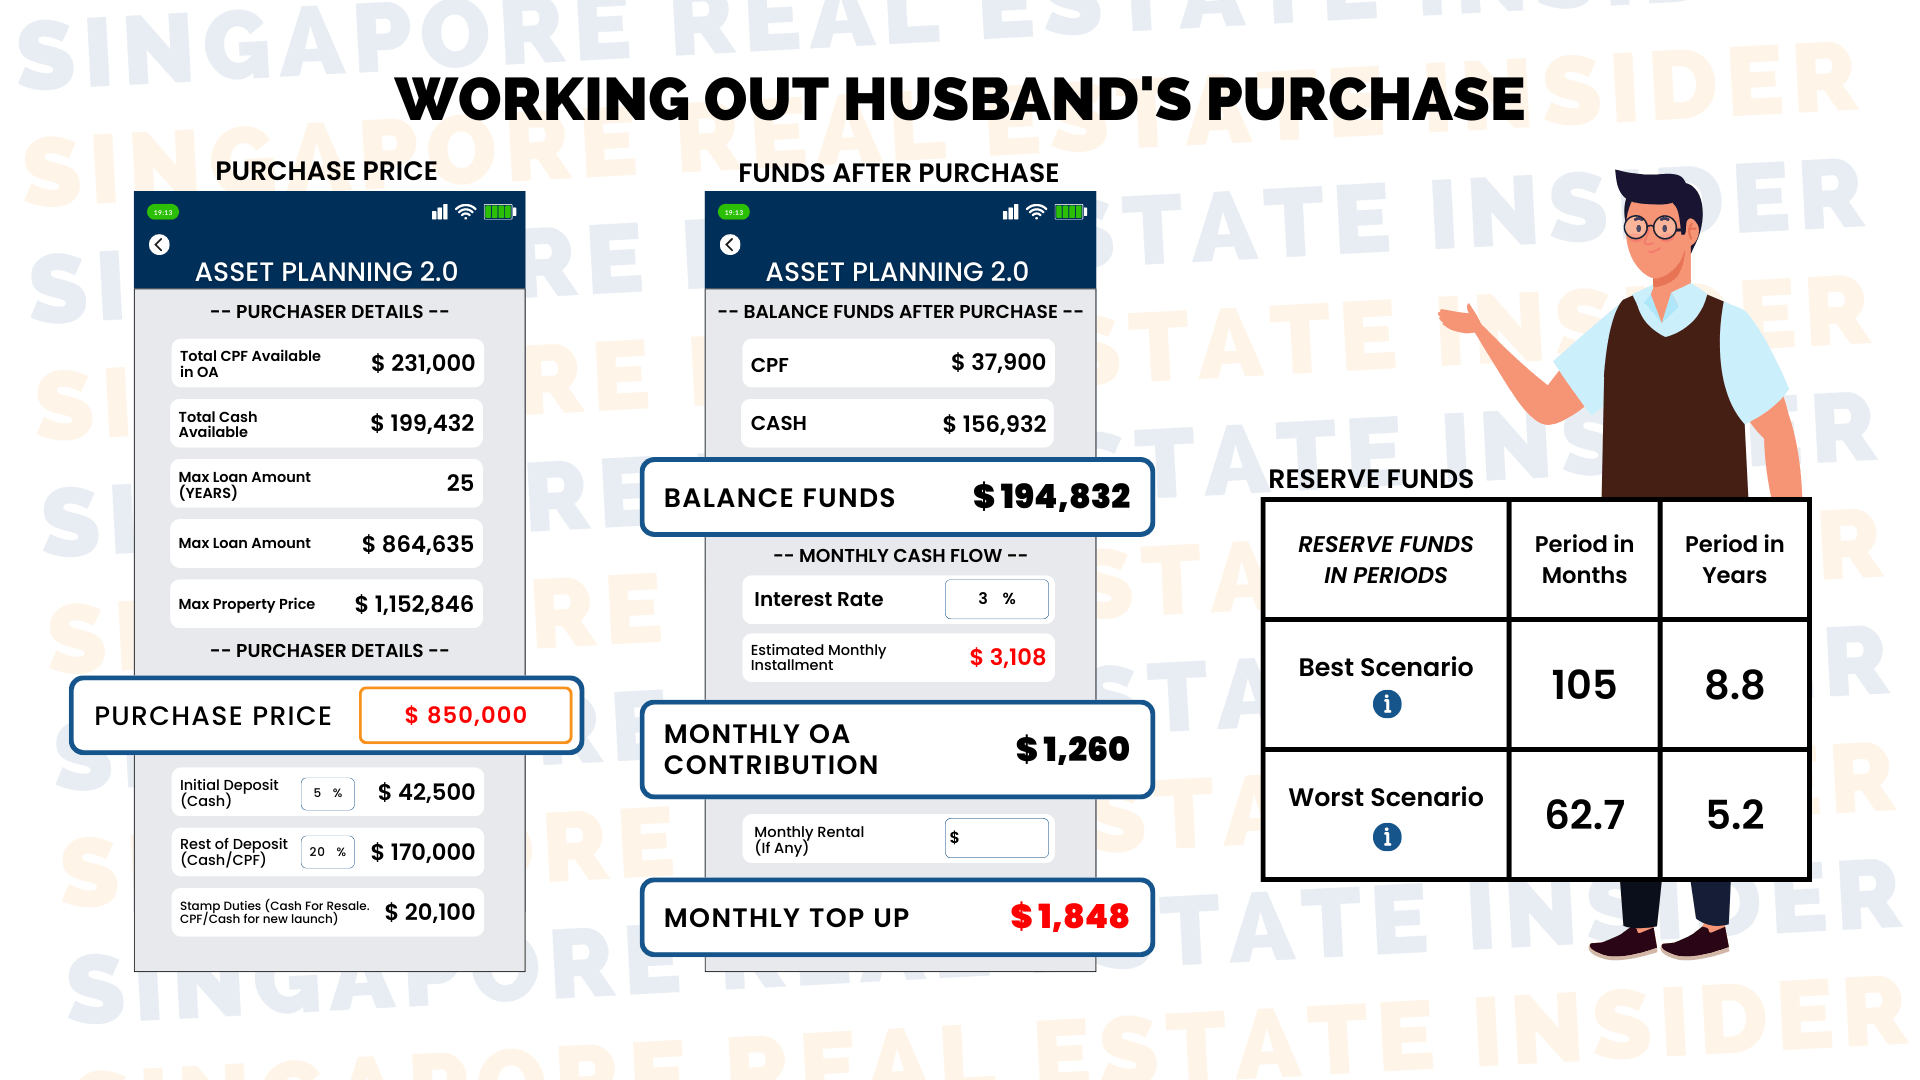 Working out husband's purchase